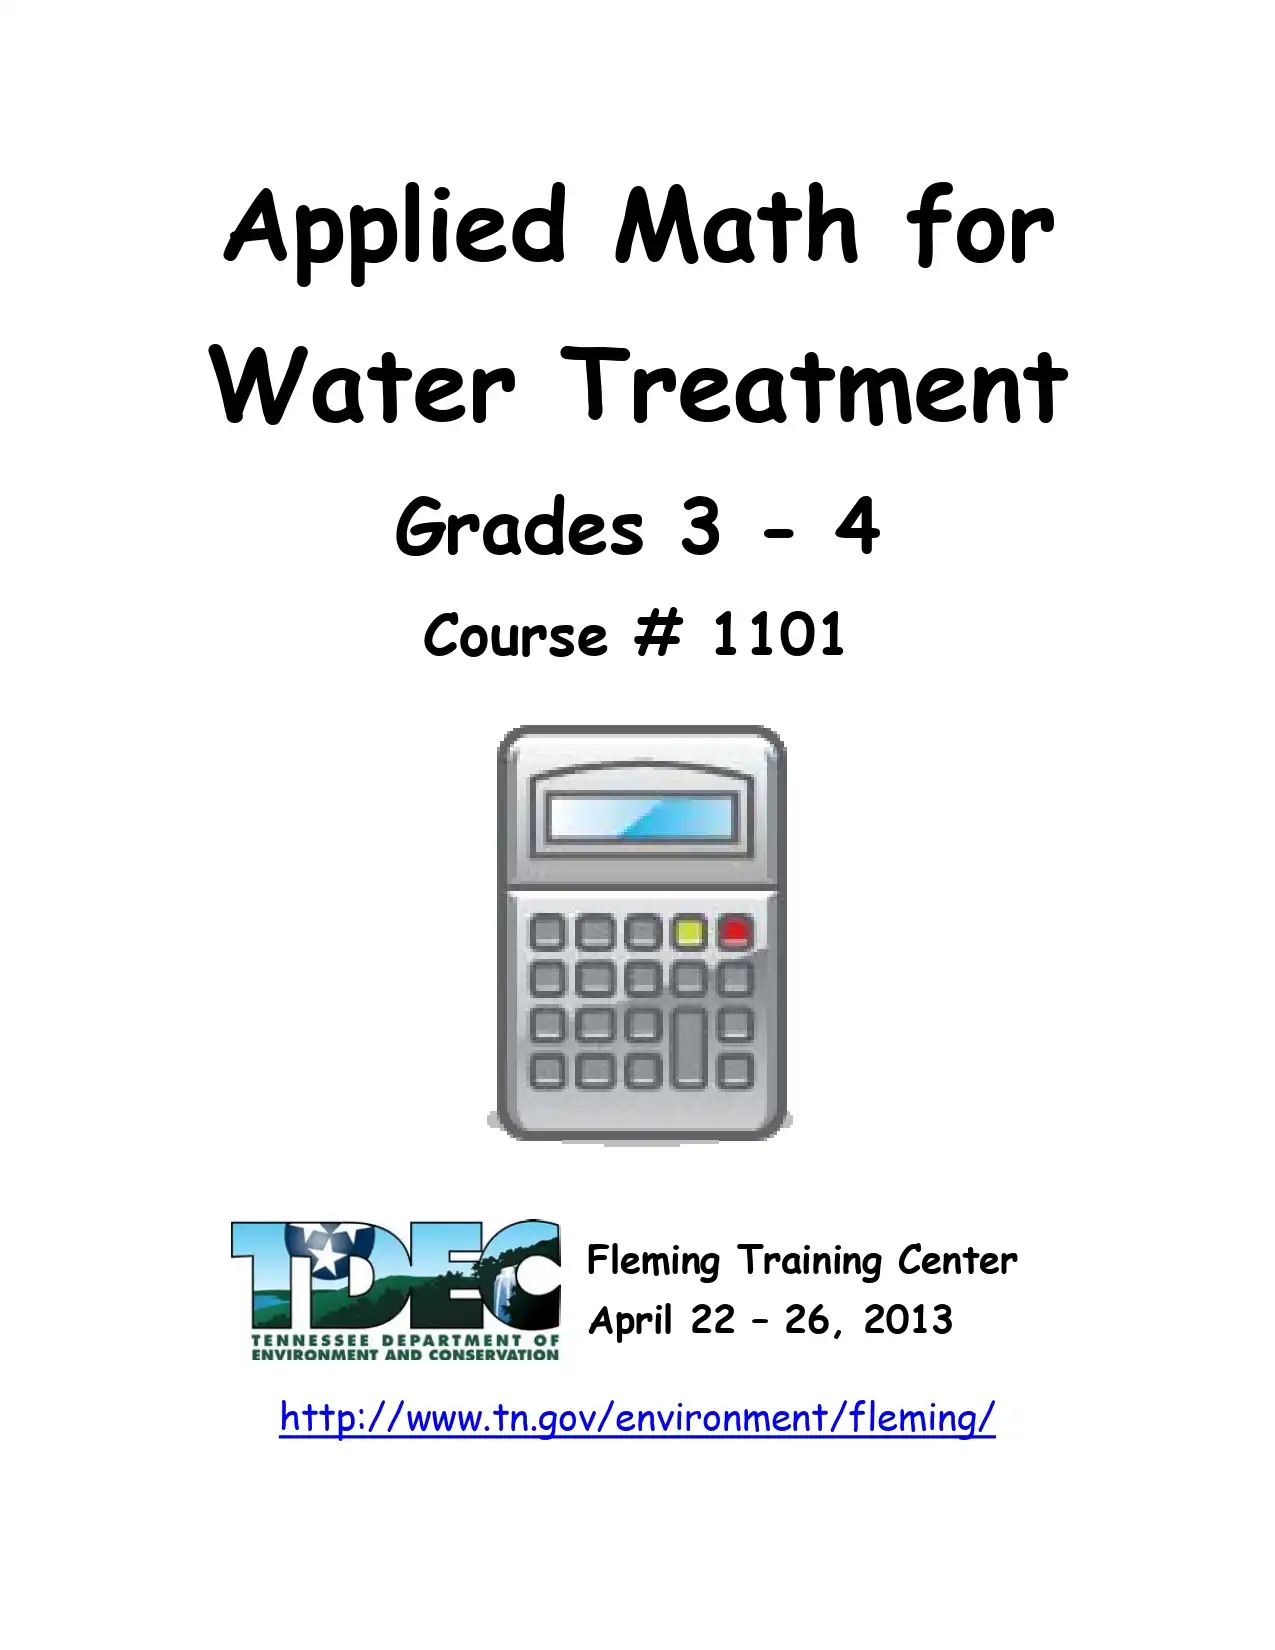 Applied Math for Water Treatment Grades 3 – 4